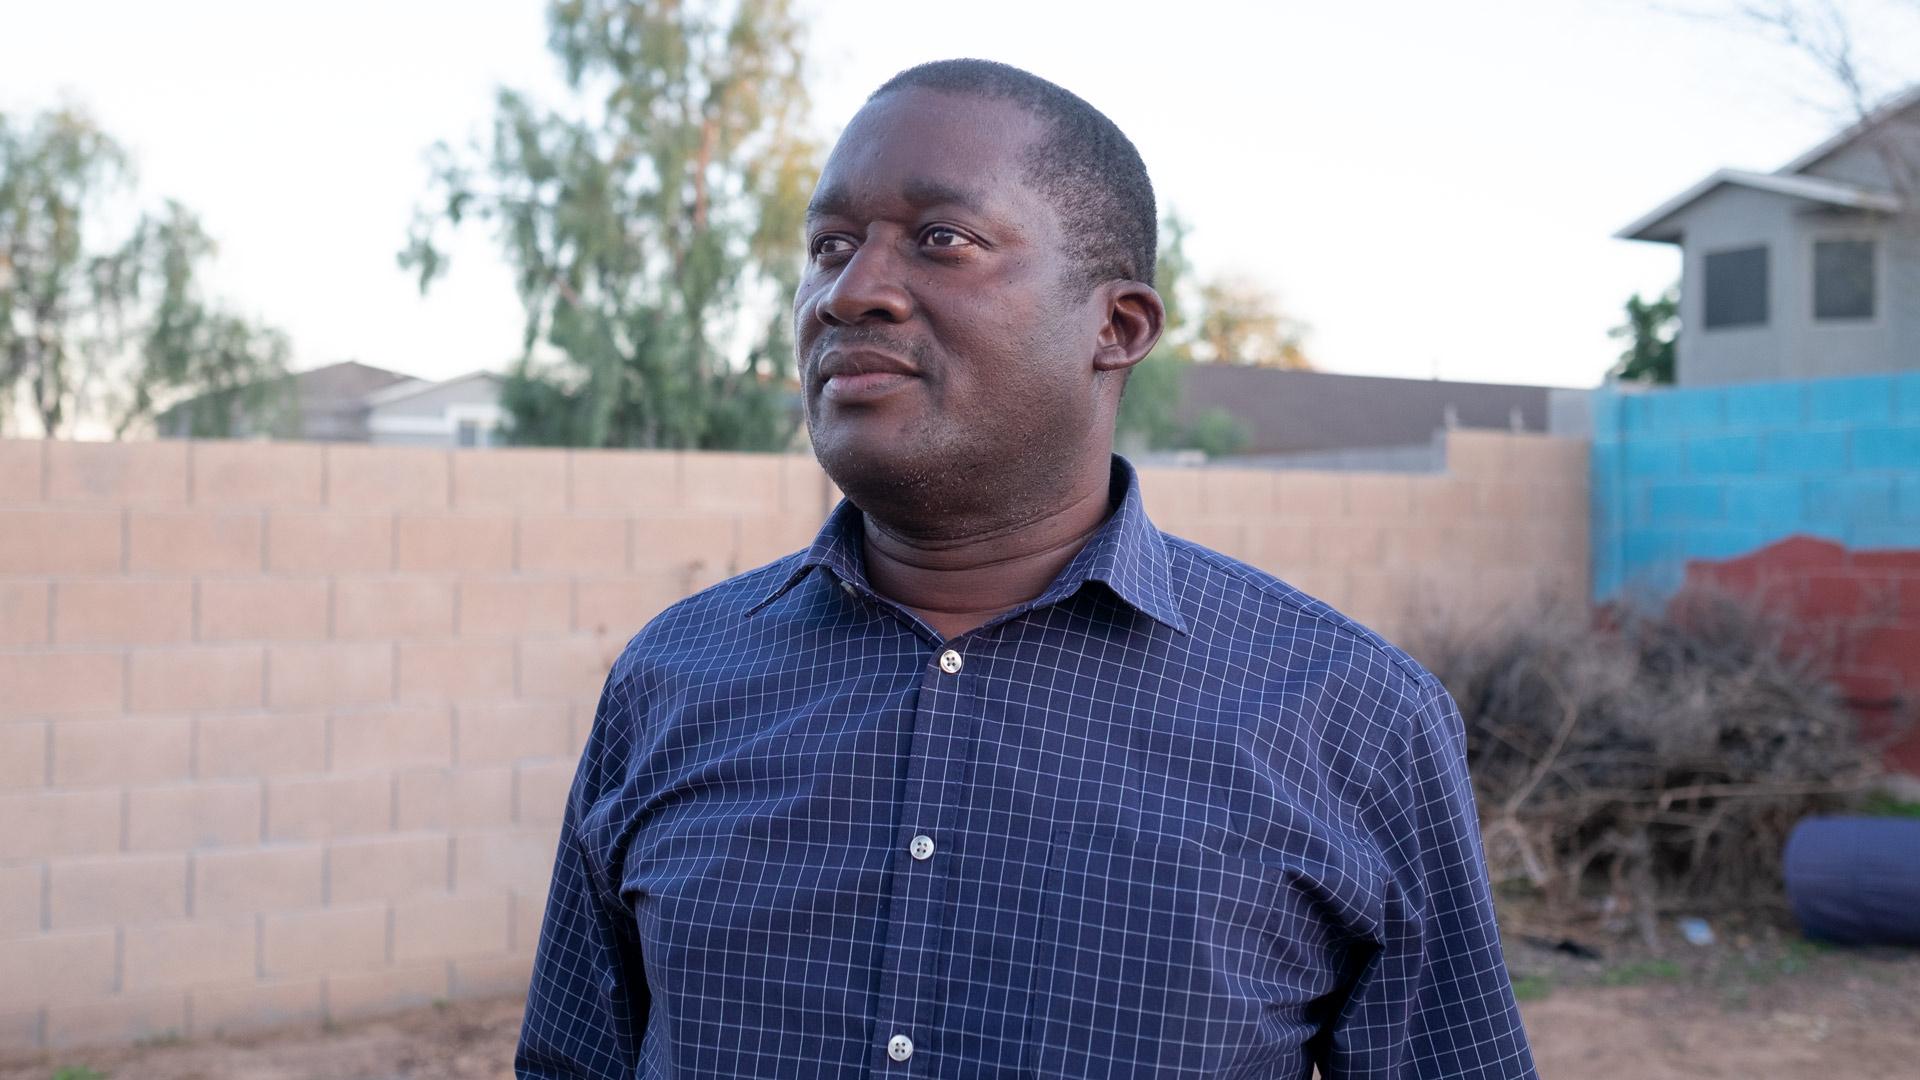 Rodney Montreuil grew up in Cap-Haitien, Haiti and has lived in Phoenix for the last two decades.